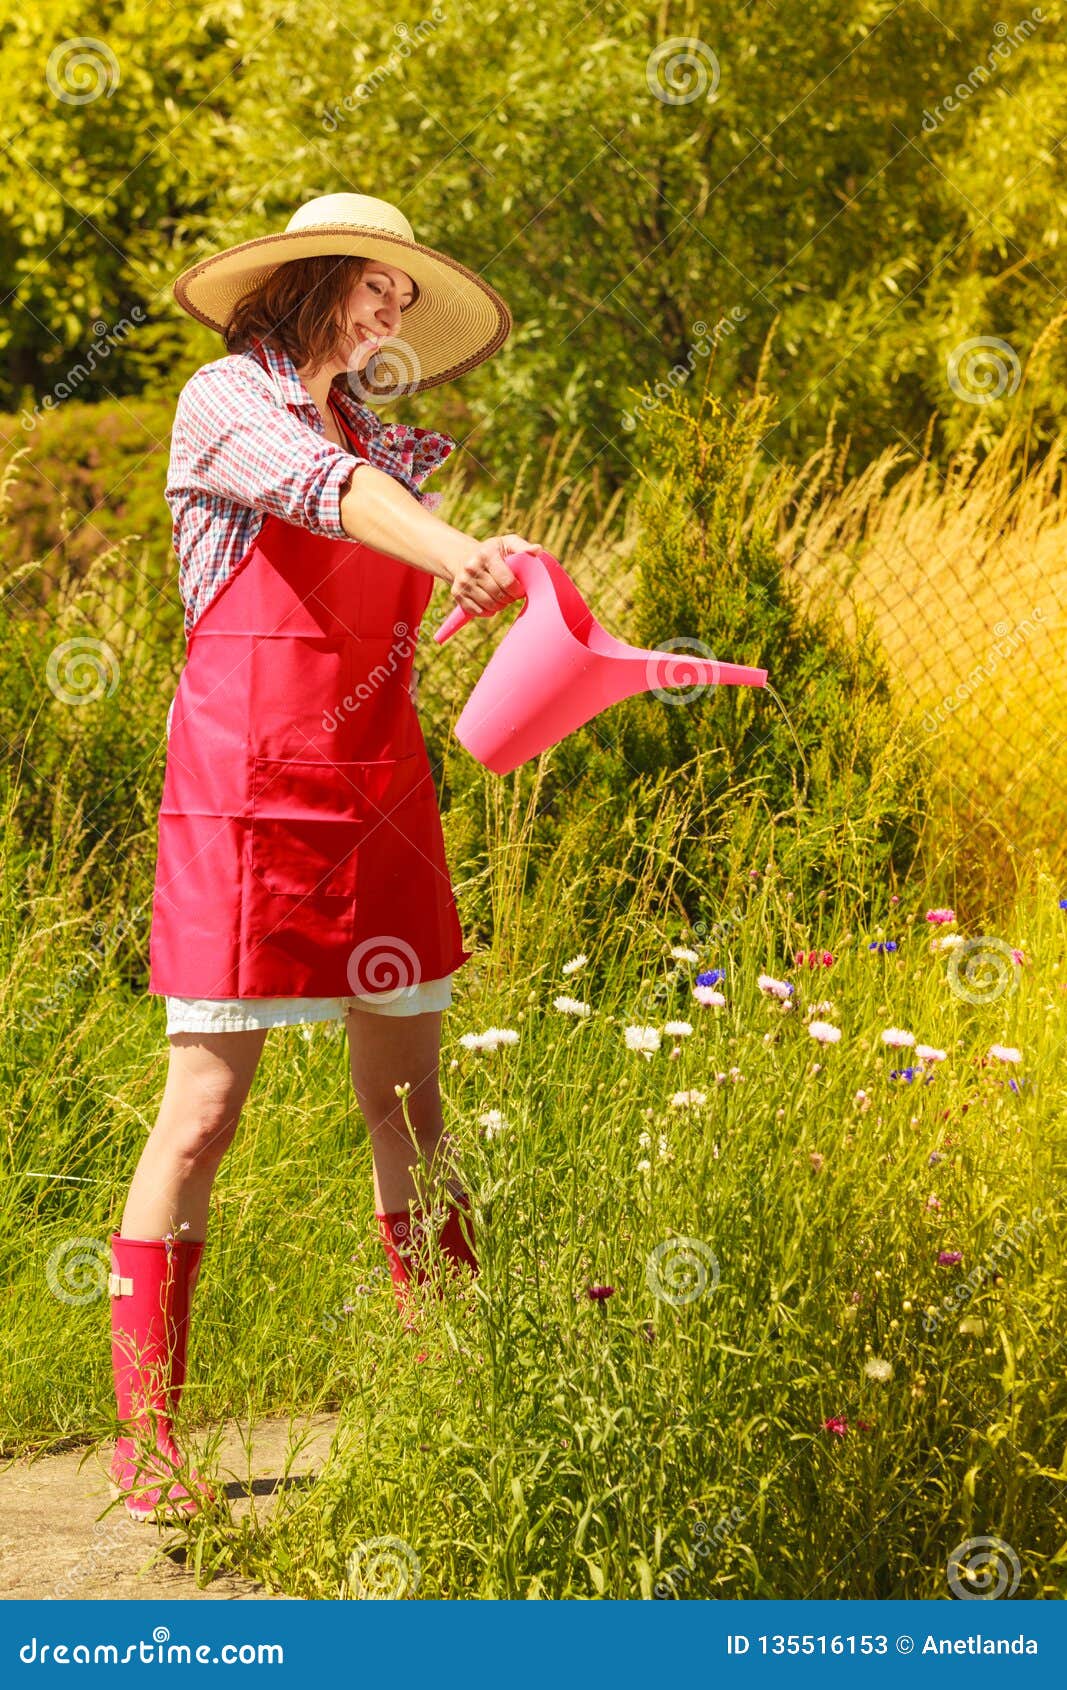 Woman Watering Plants in Garden Stock Image - Image of cultivation ...